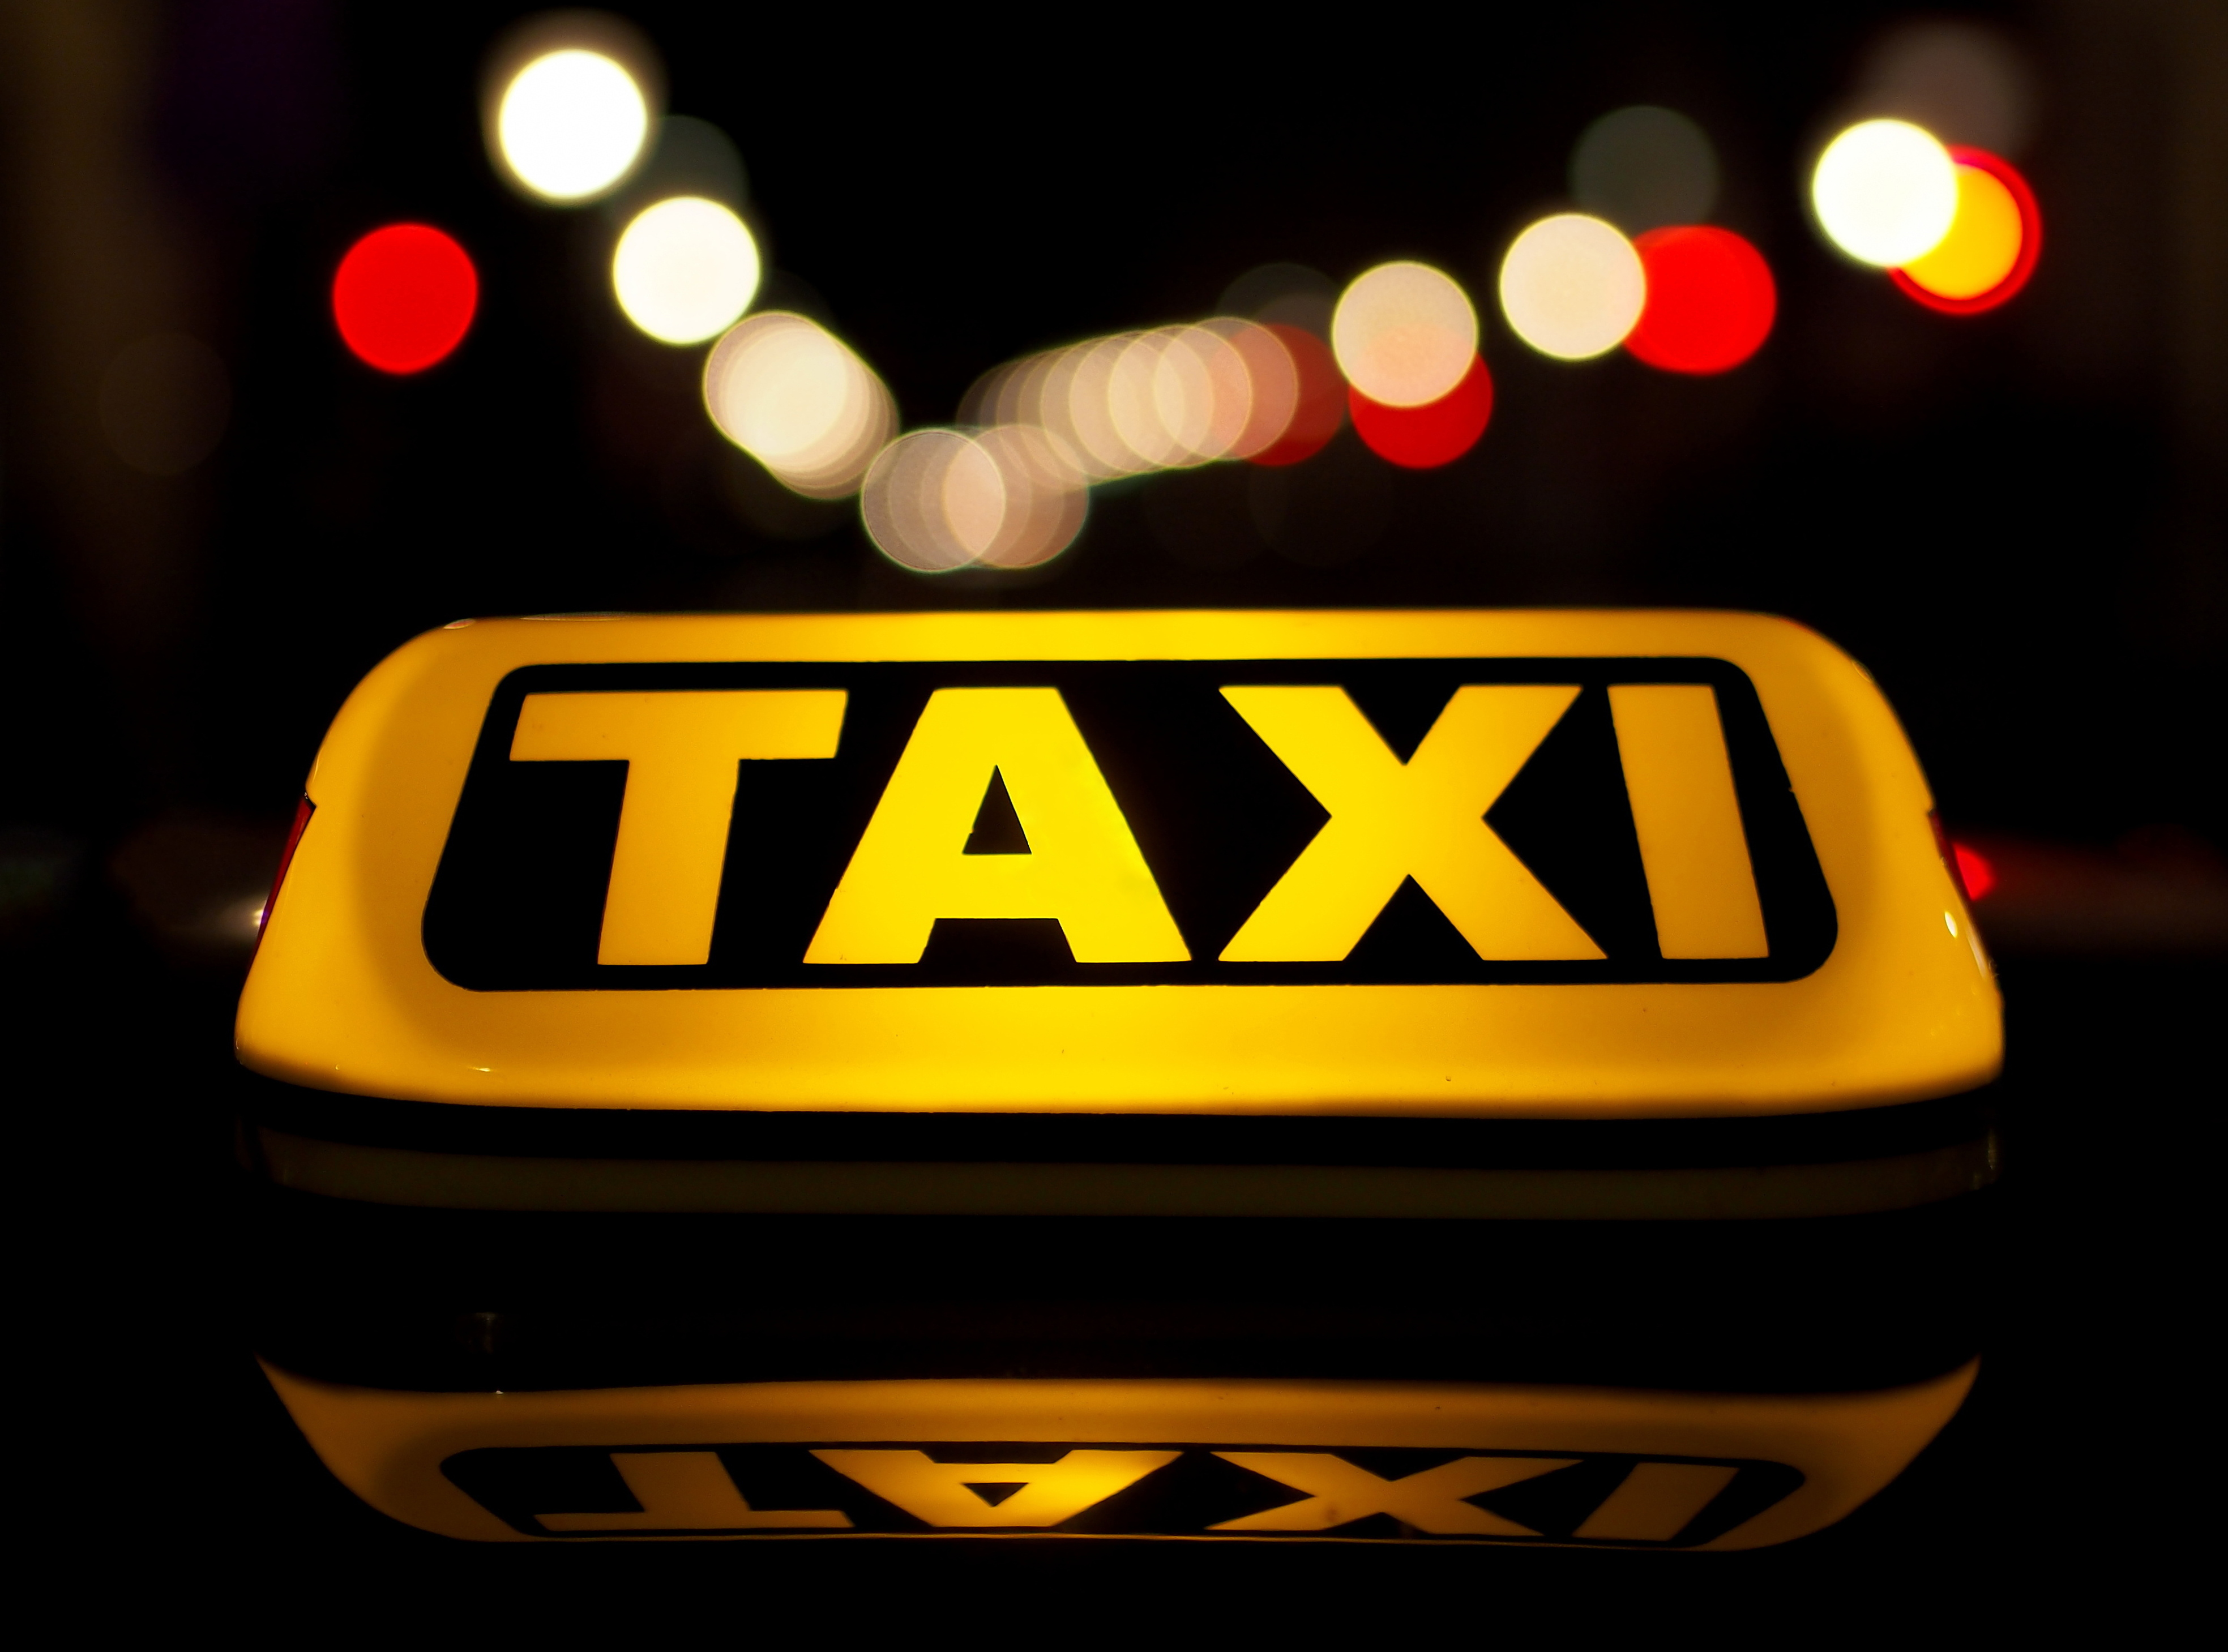 Taxi Image , HD Wallpaper & Backgrounds